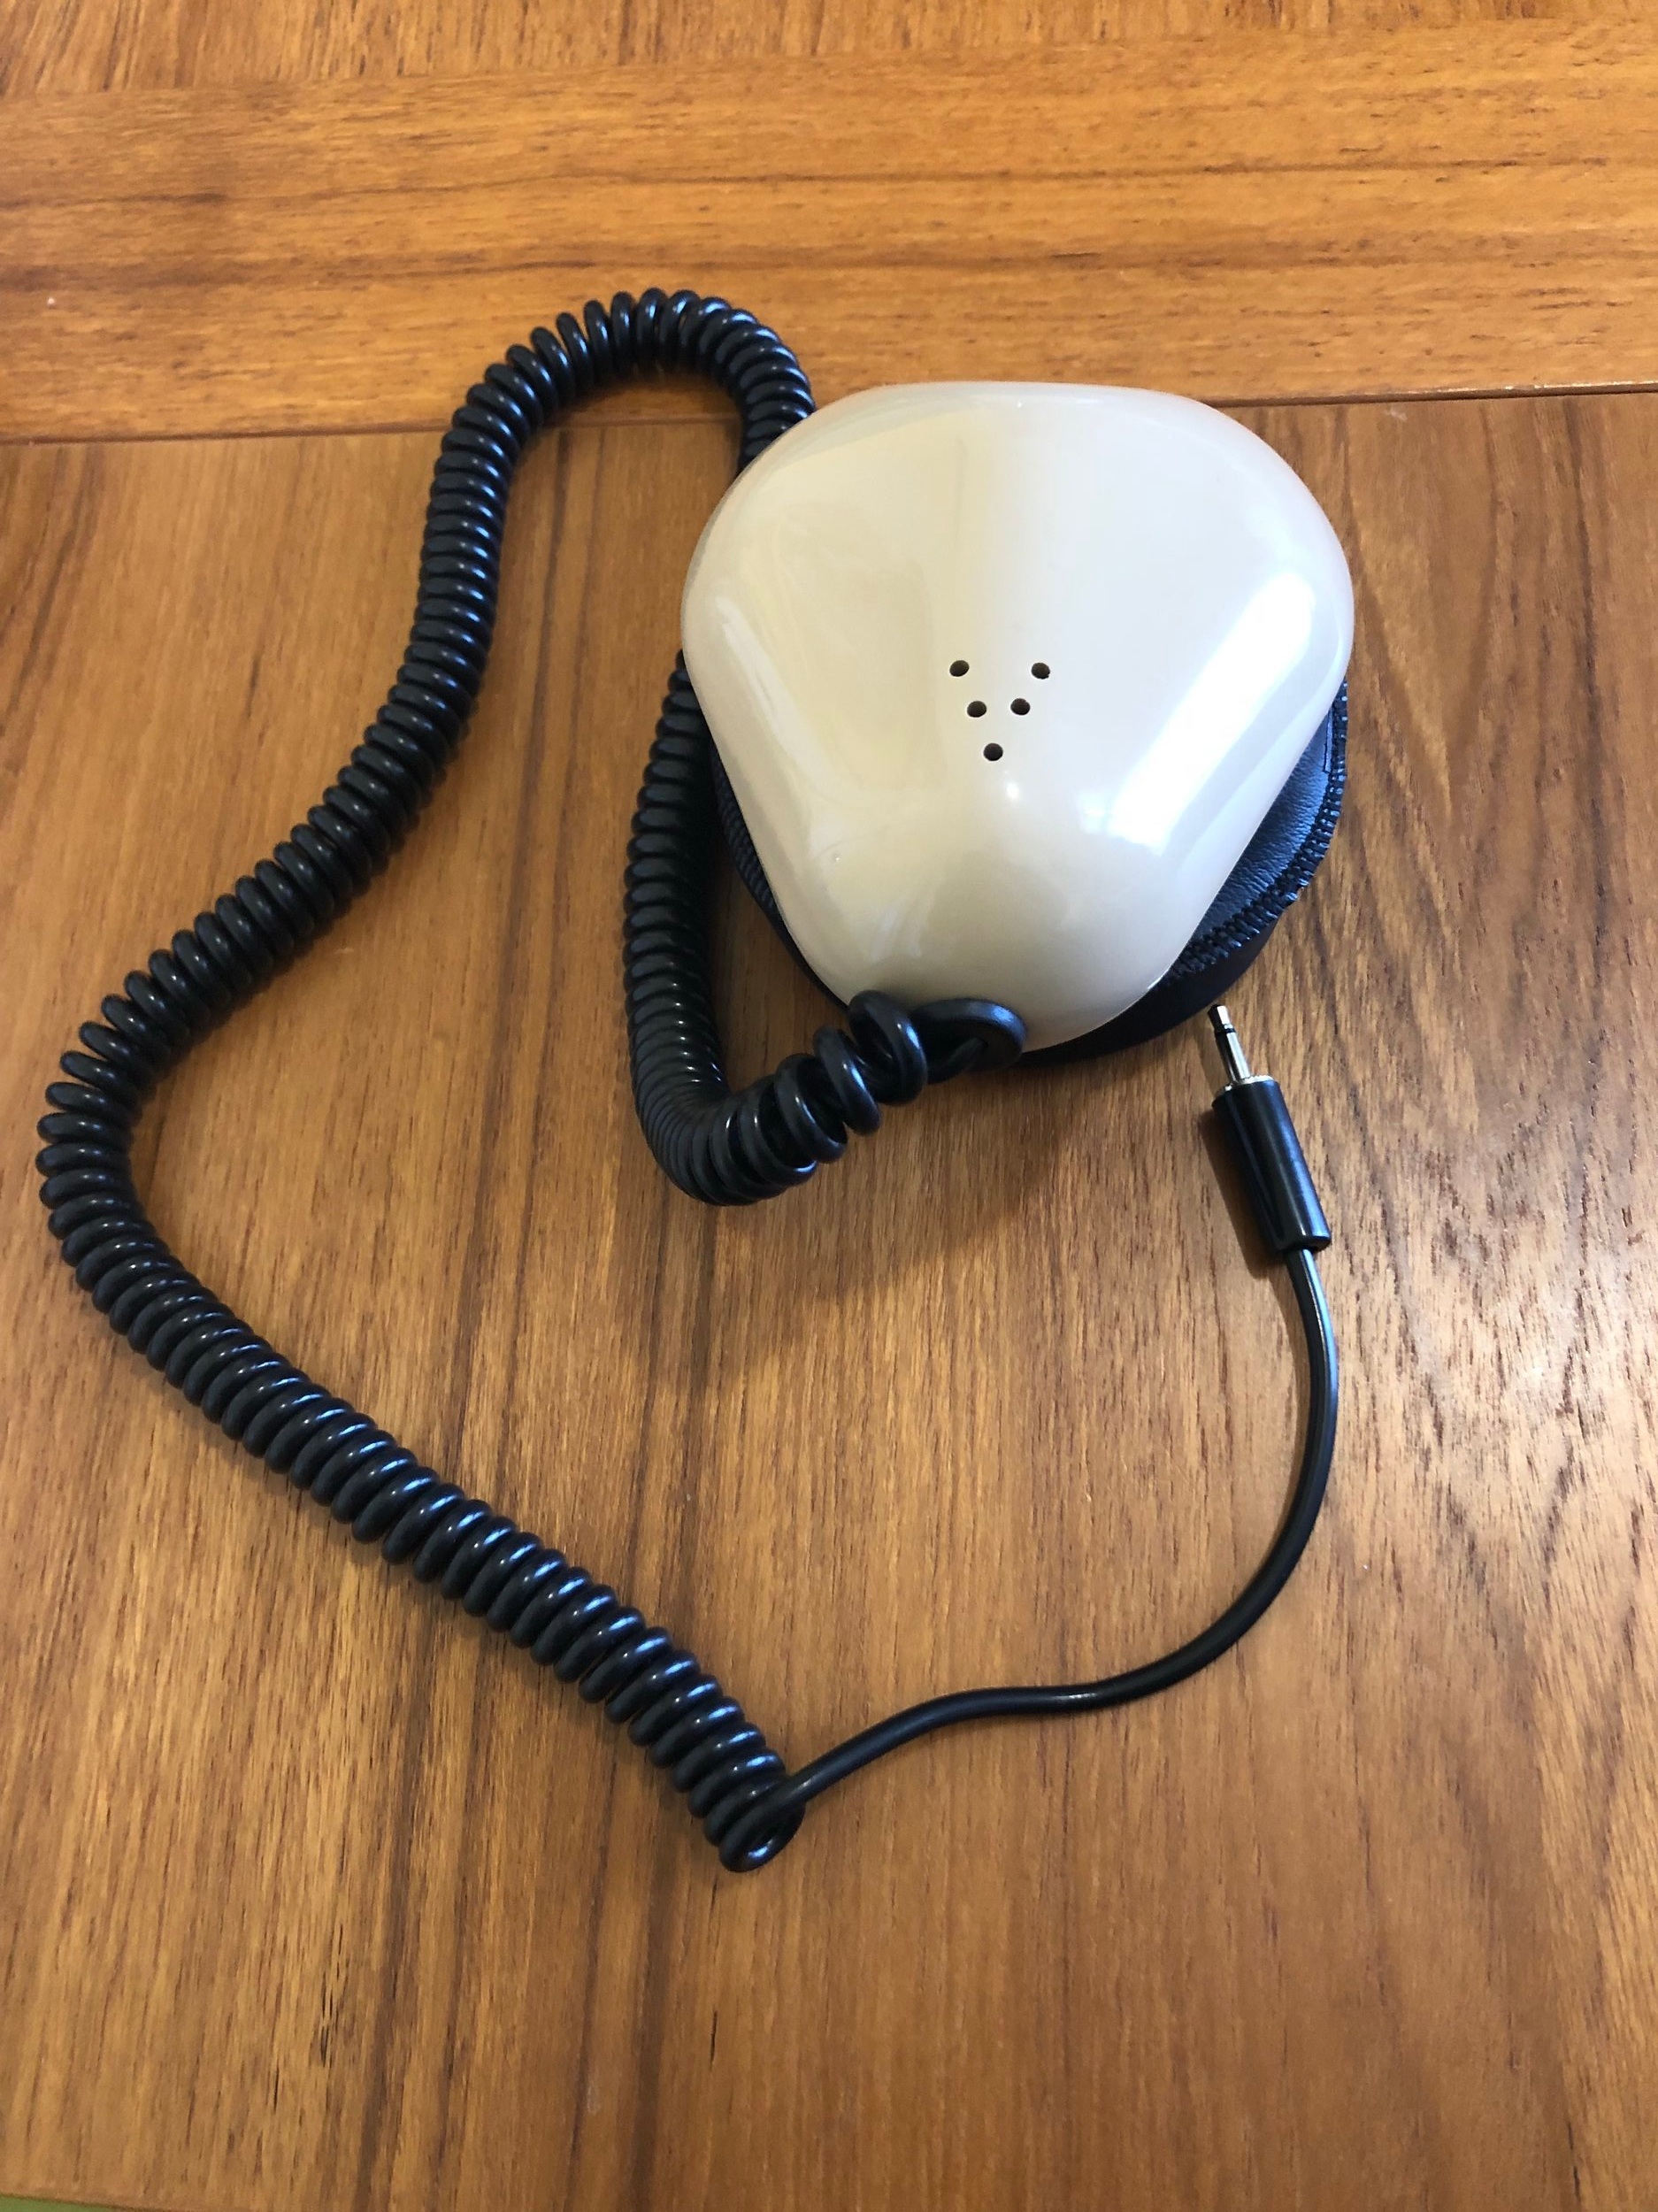 [A 'stenographer's mask' rests on a table it is a mouth sized metal case&nbsp; containing a microphone with a flexible seal that fits around the mouth. A small microphone cable is attached.]